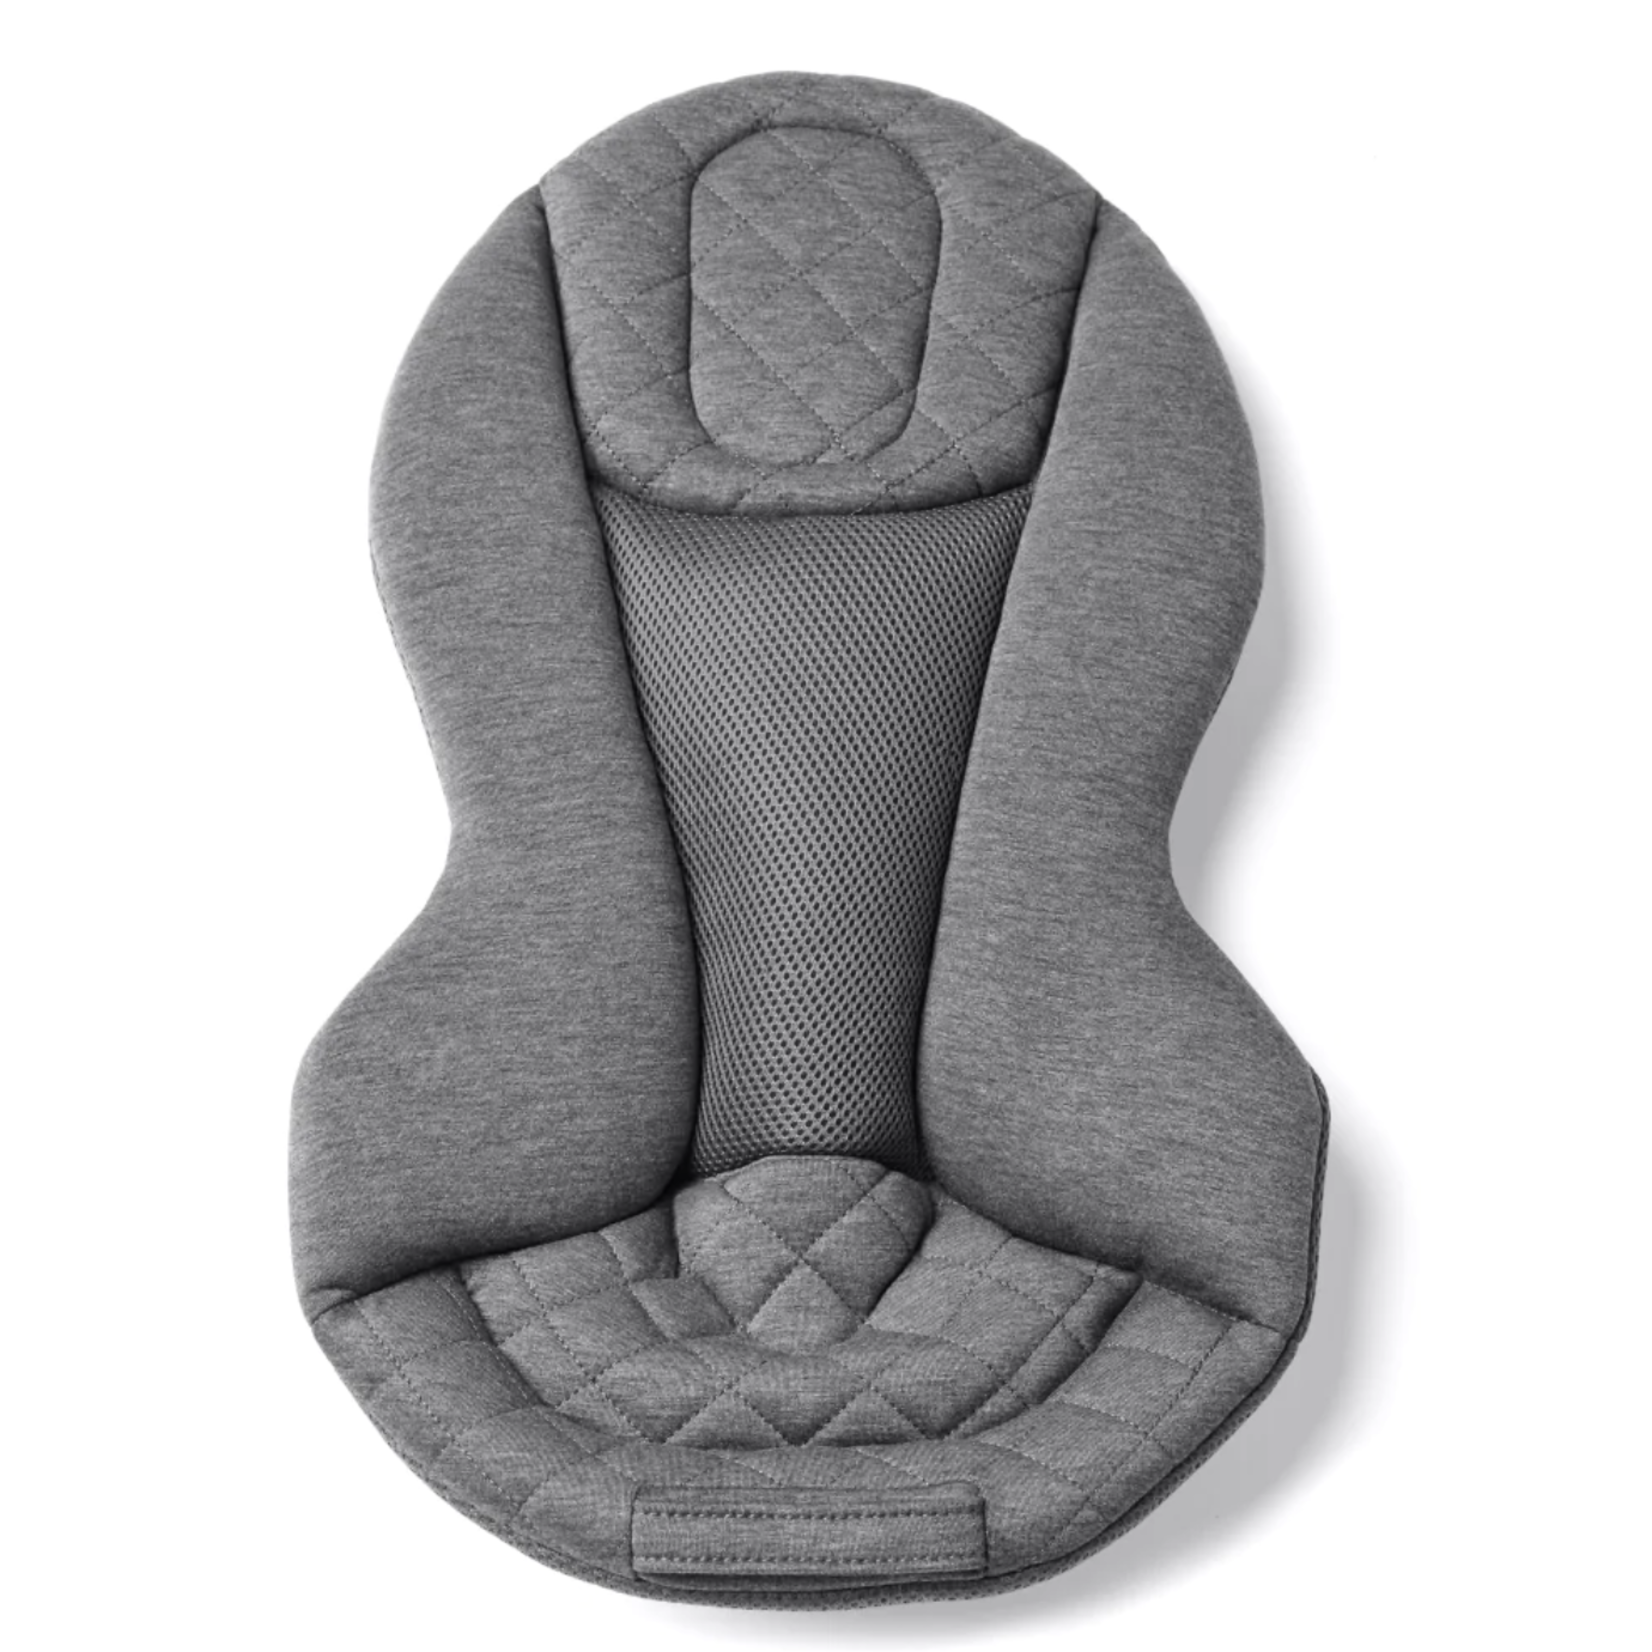 ERGOBABY EVOLVE 3 IN 1 BOUNCER - CHARCOAL GREY